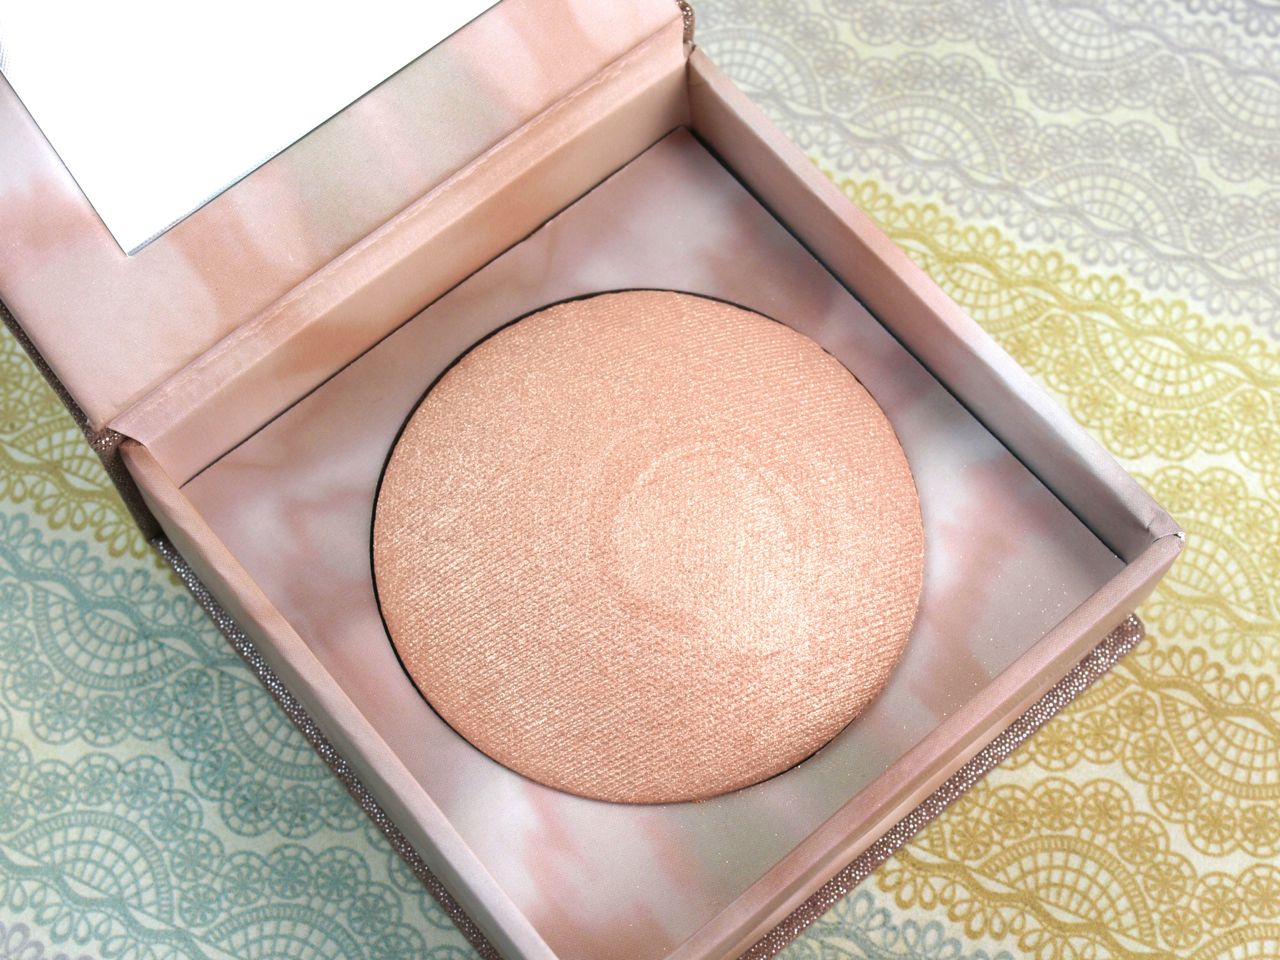 Urban Decay Naked Illuminated Highlighter in "Aura": Review and Swatches